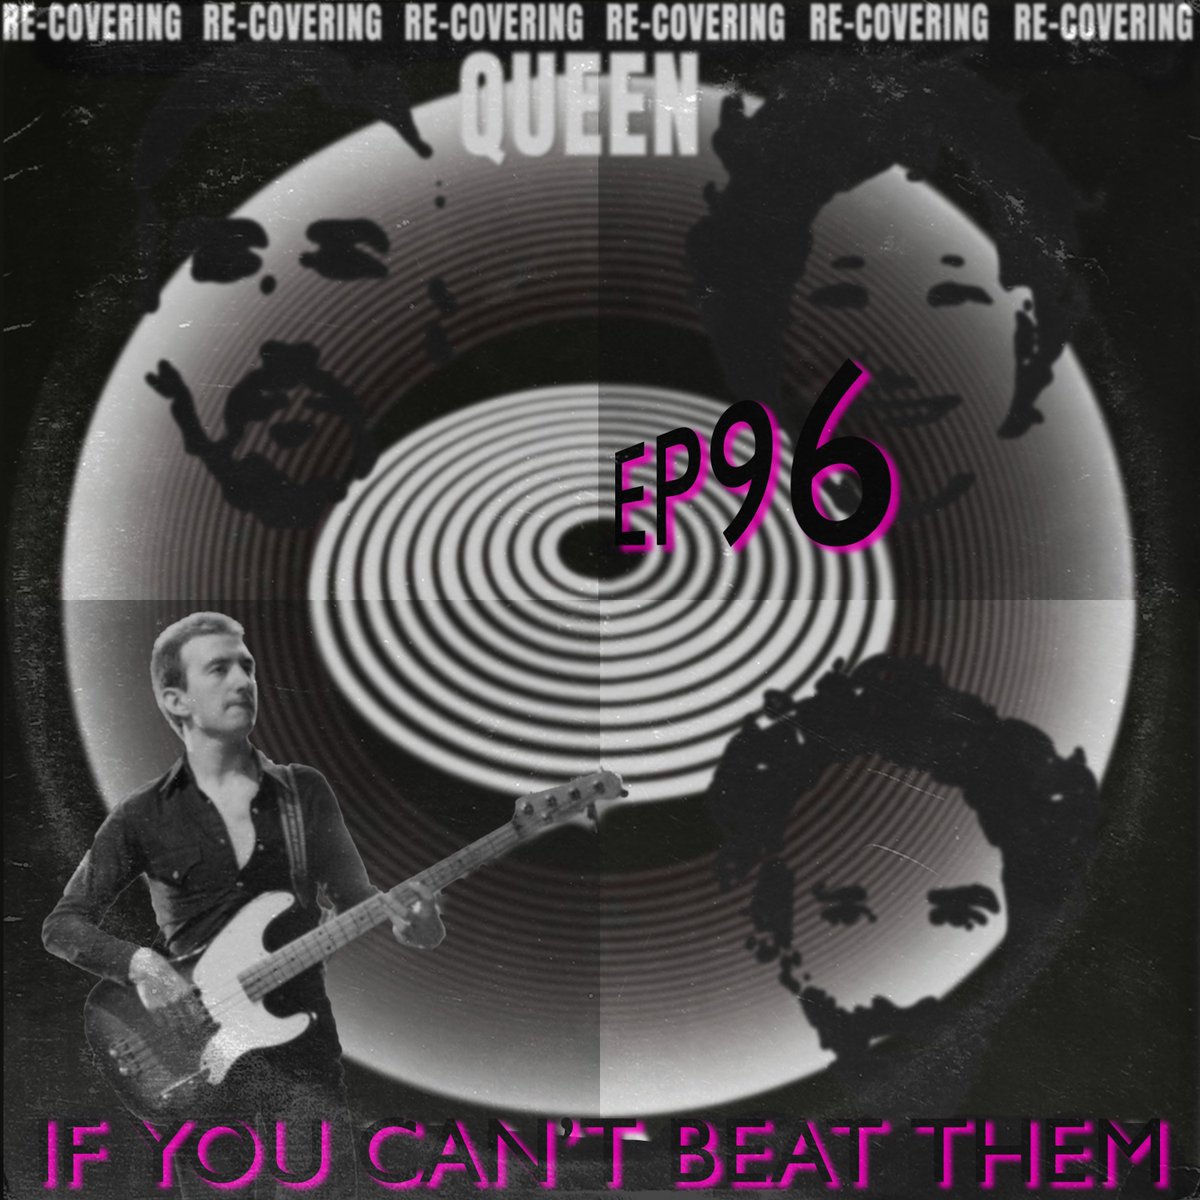 🎧👑 New episode alert! The Recovering Queen Podcast dives into John Deacon's 'If You Can't Beat Them' off of the 'Jazz' album. Join us for in-depth analysis, a cover by Ian, and scores 🎶🎸 Don't miss it:  🔥  #JohnDeacon #IfYouCantBeatThem #Queen #Jazz #Podcast